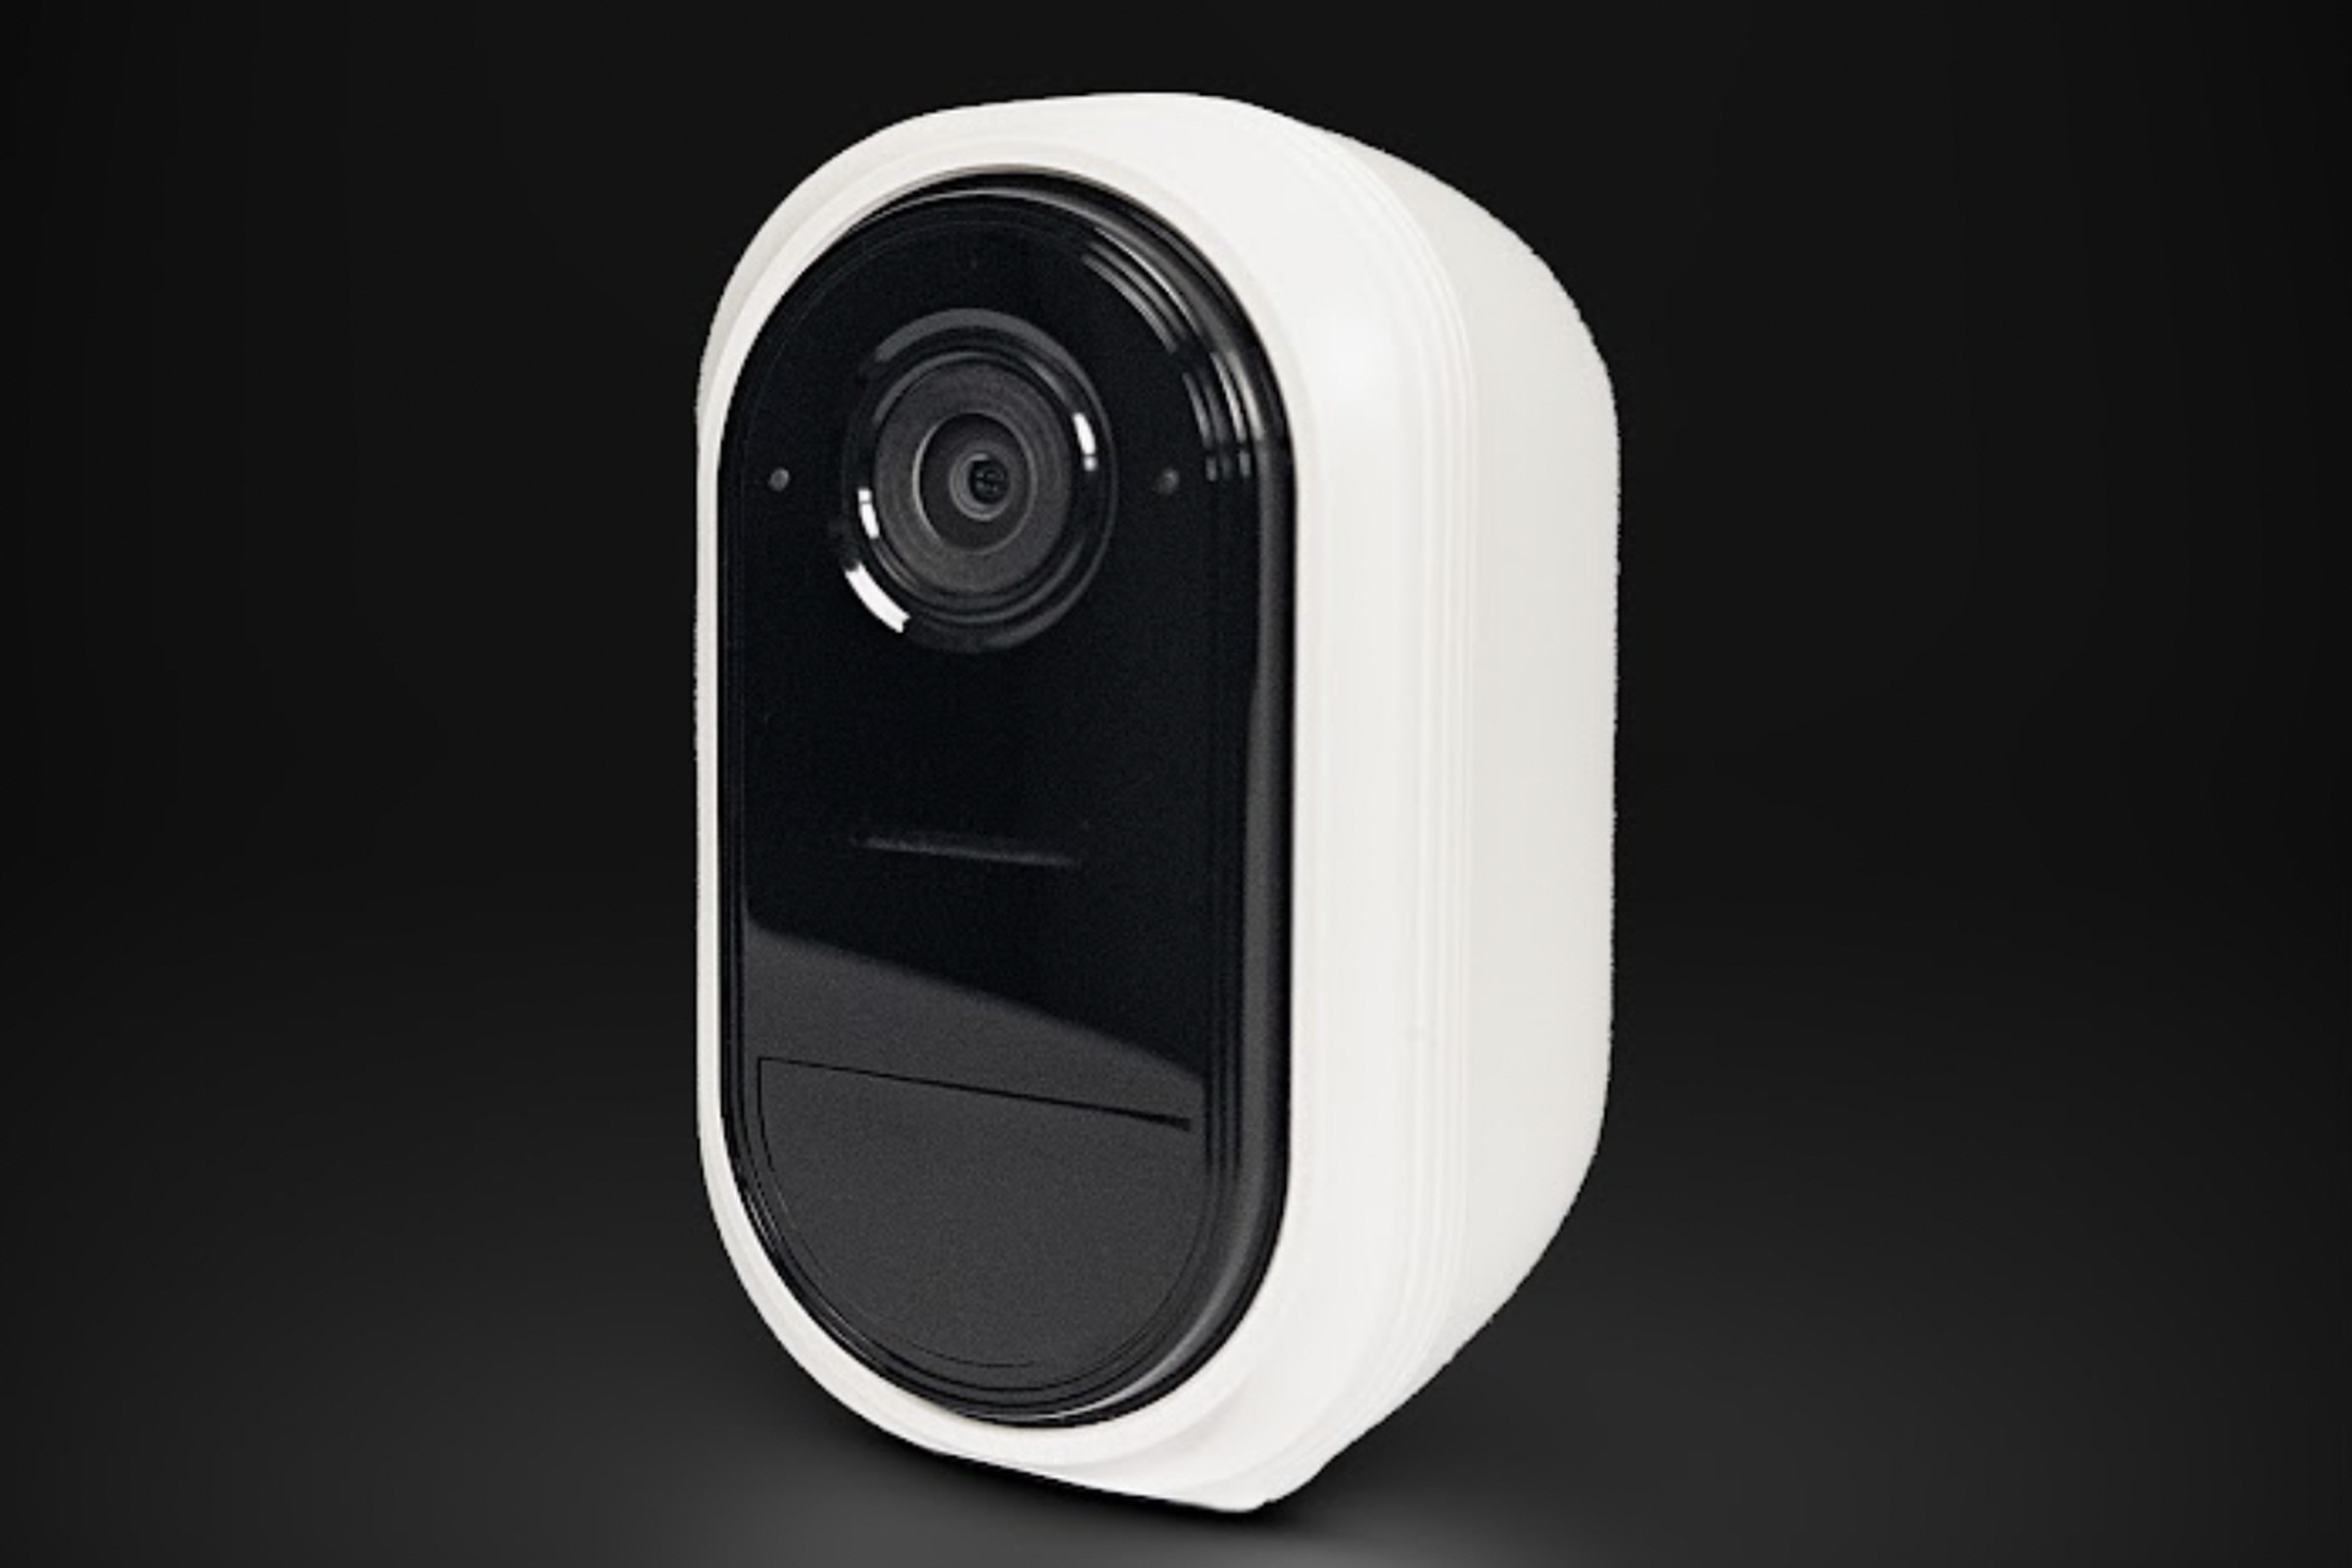 A picture of the Abode security camera against a black backdrop.